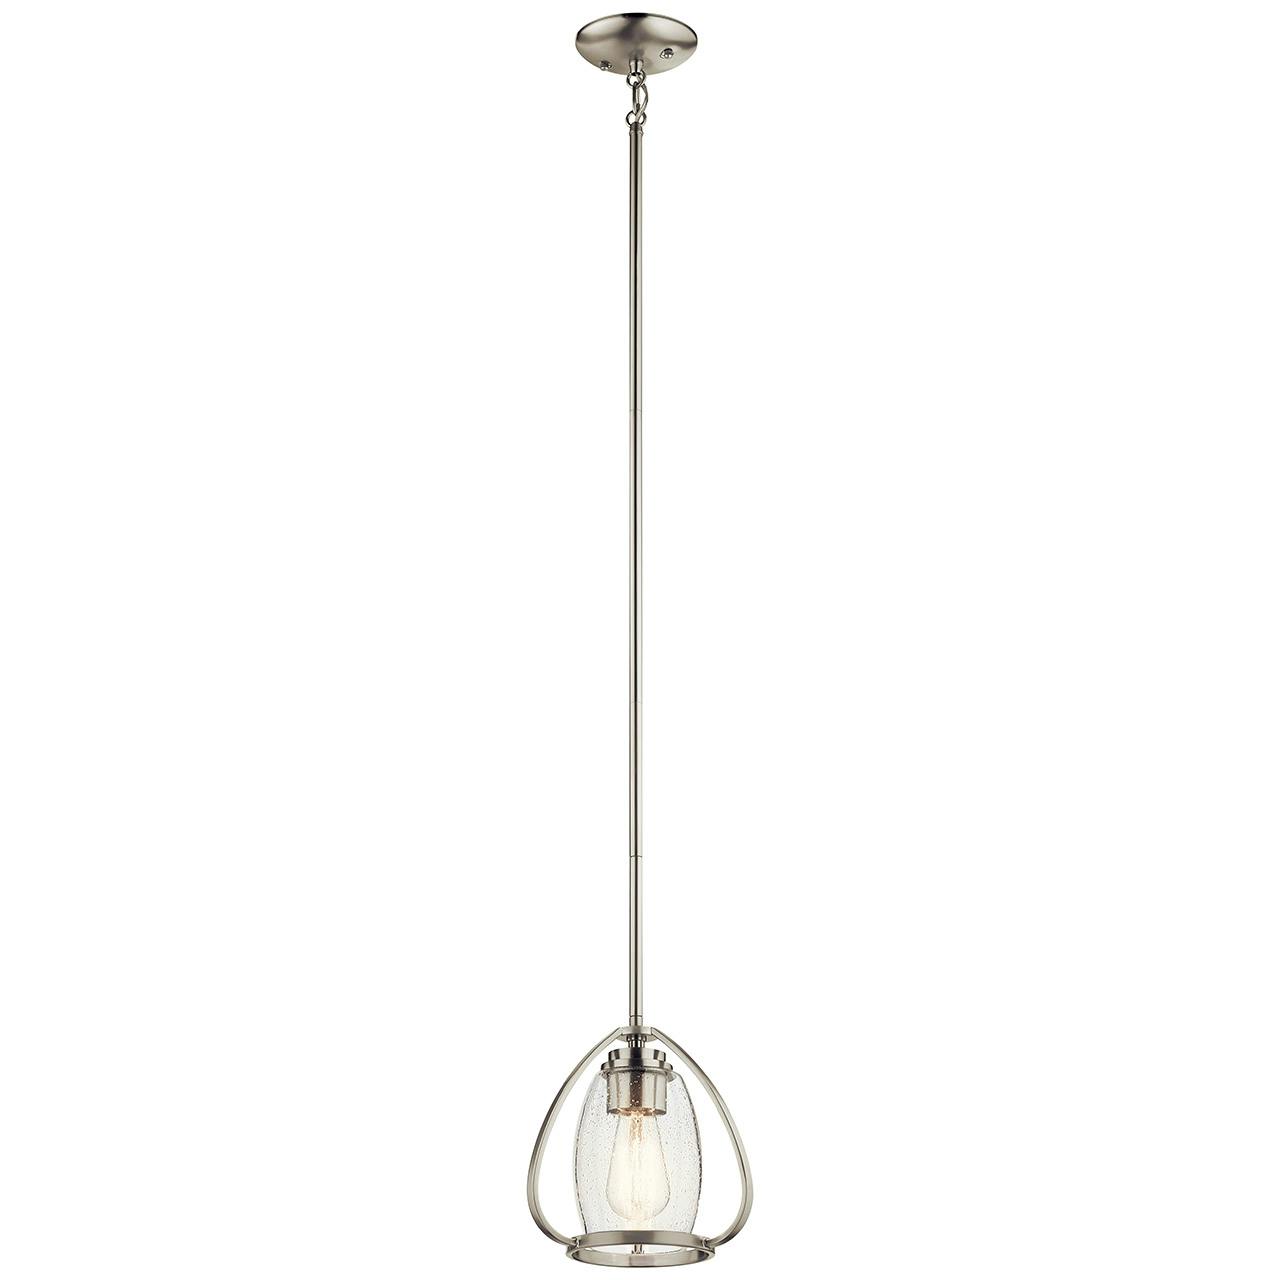 Tuscany 1 Light Mini Pendant in Nickel on a white background